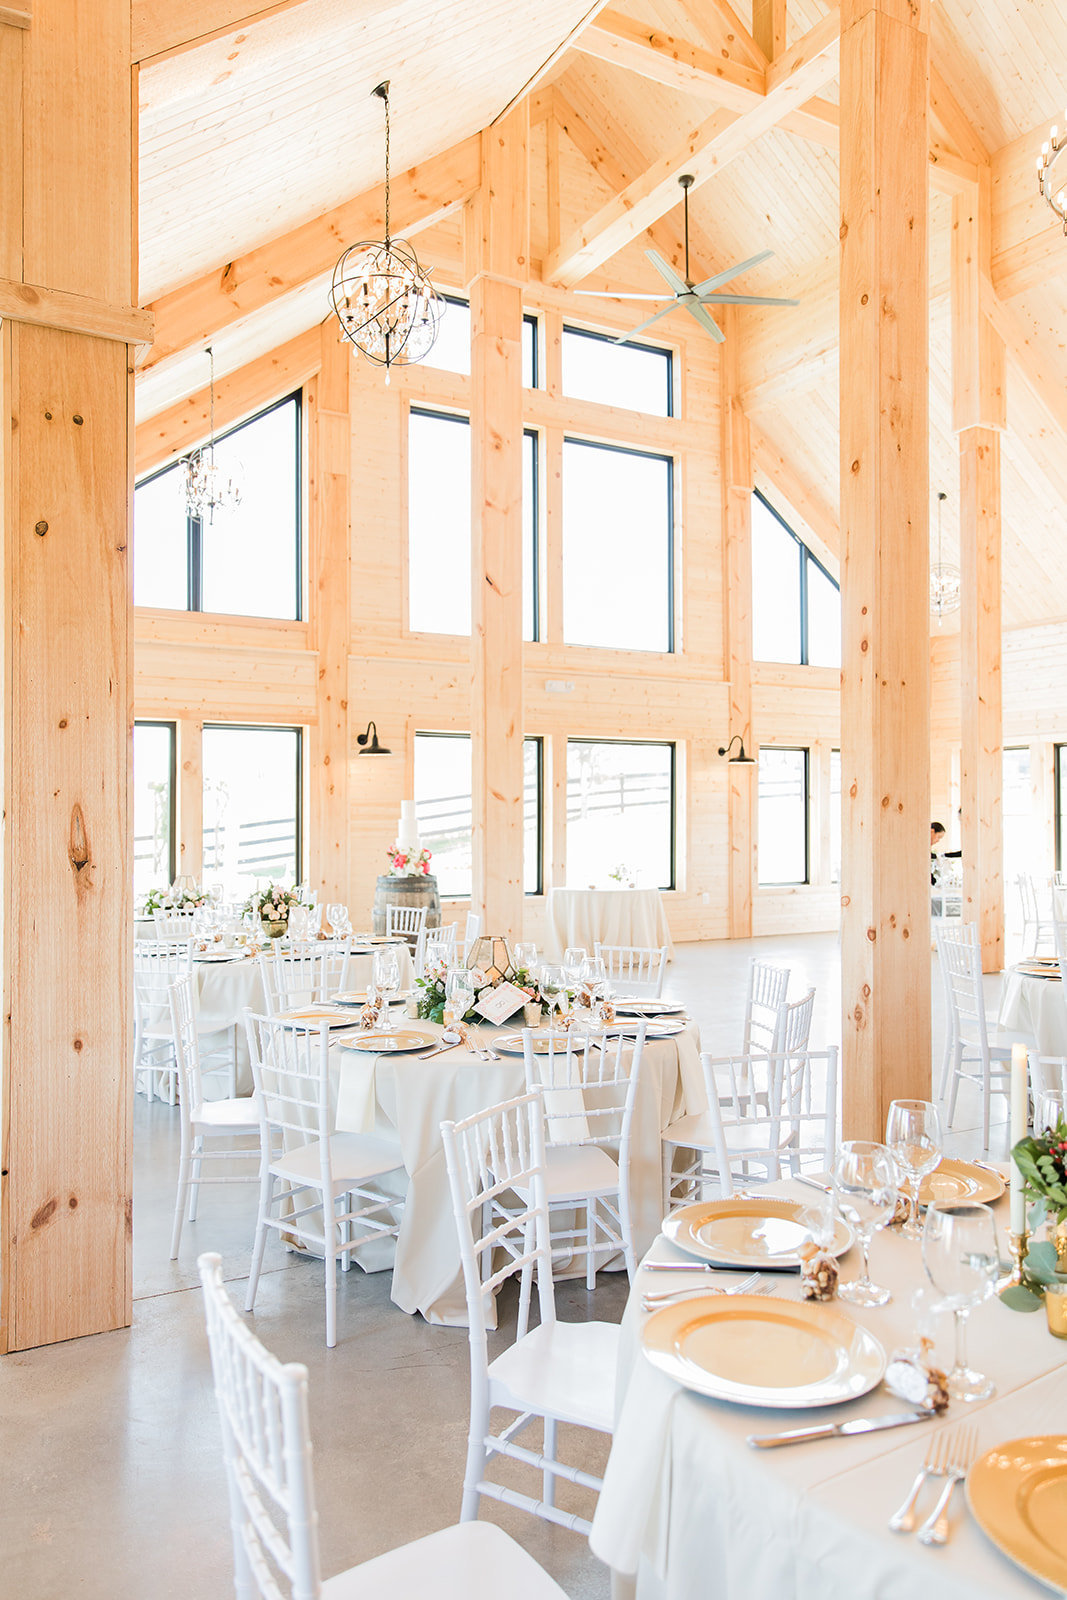 Classic-Catering-Wedding-Barn-At-Willowbrooke-Willowbrook-Willow-Brook-Brooke-November-2019-17